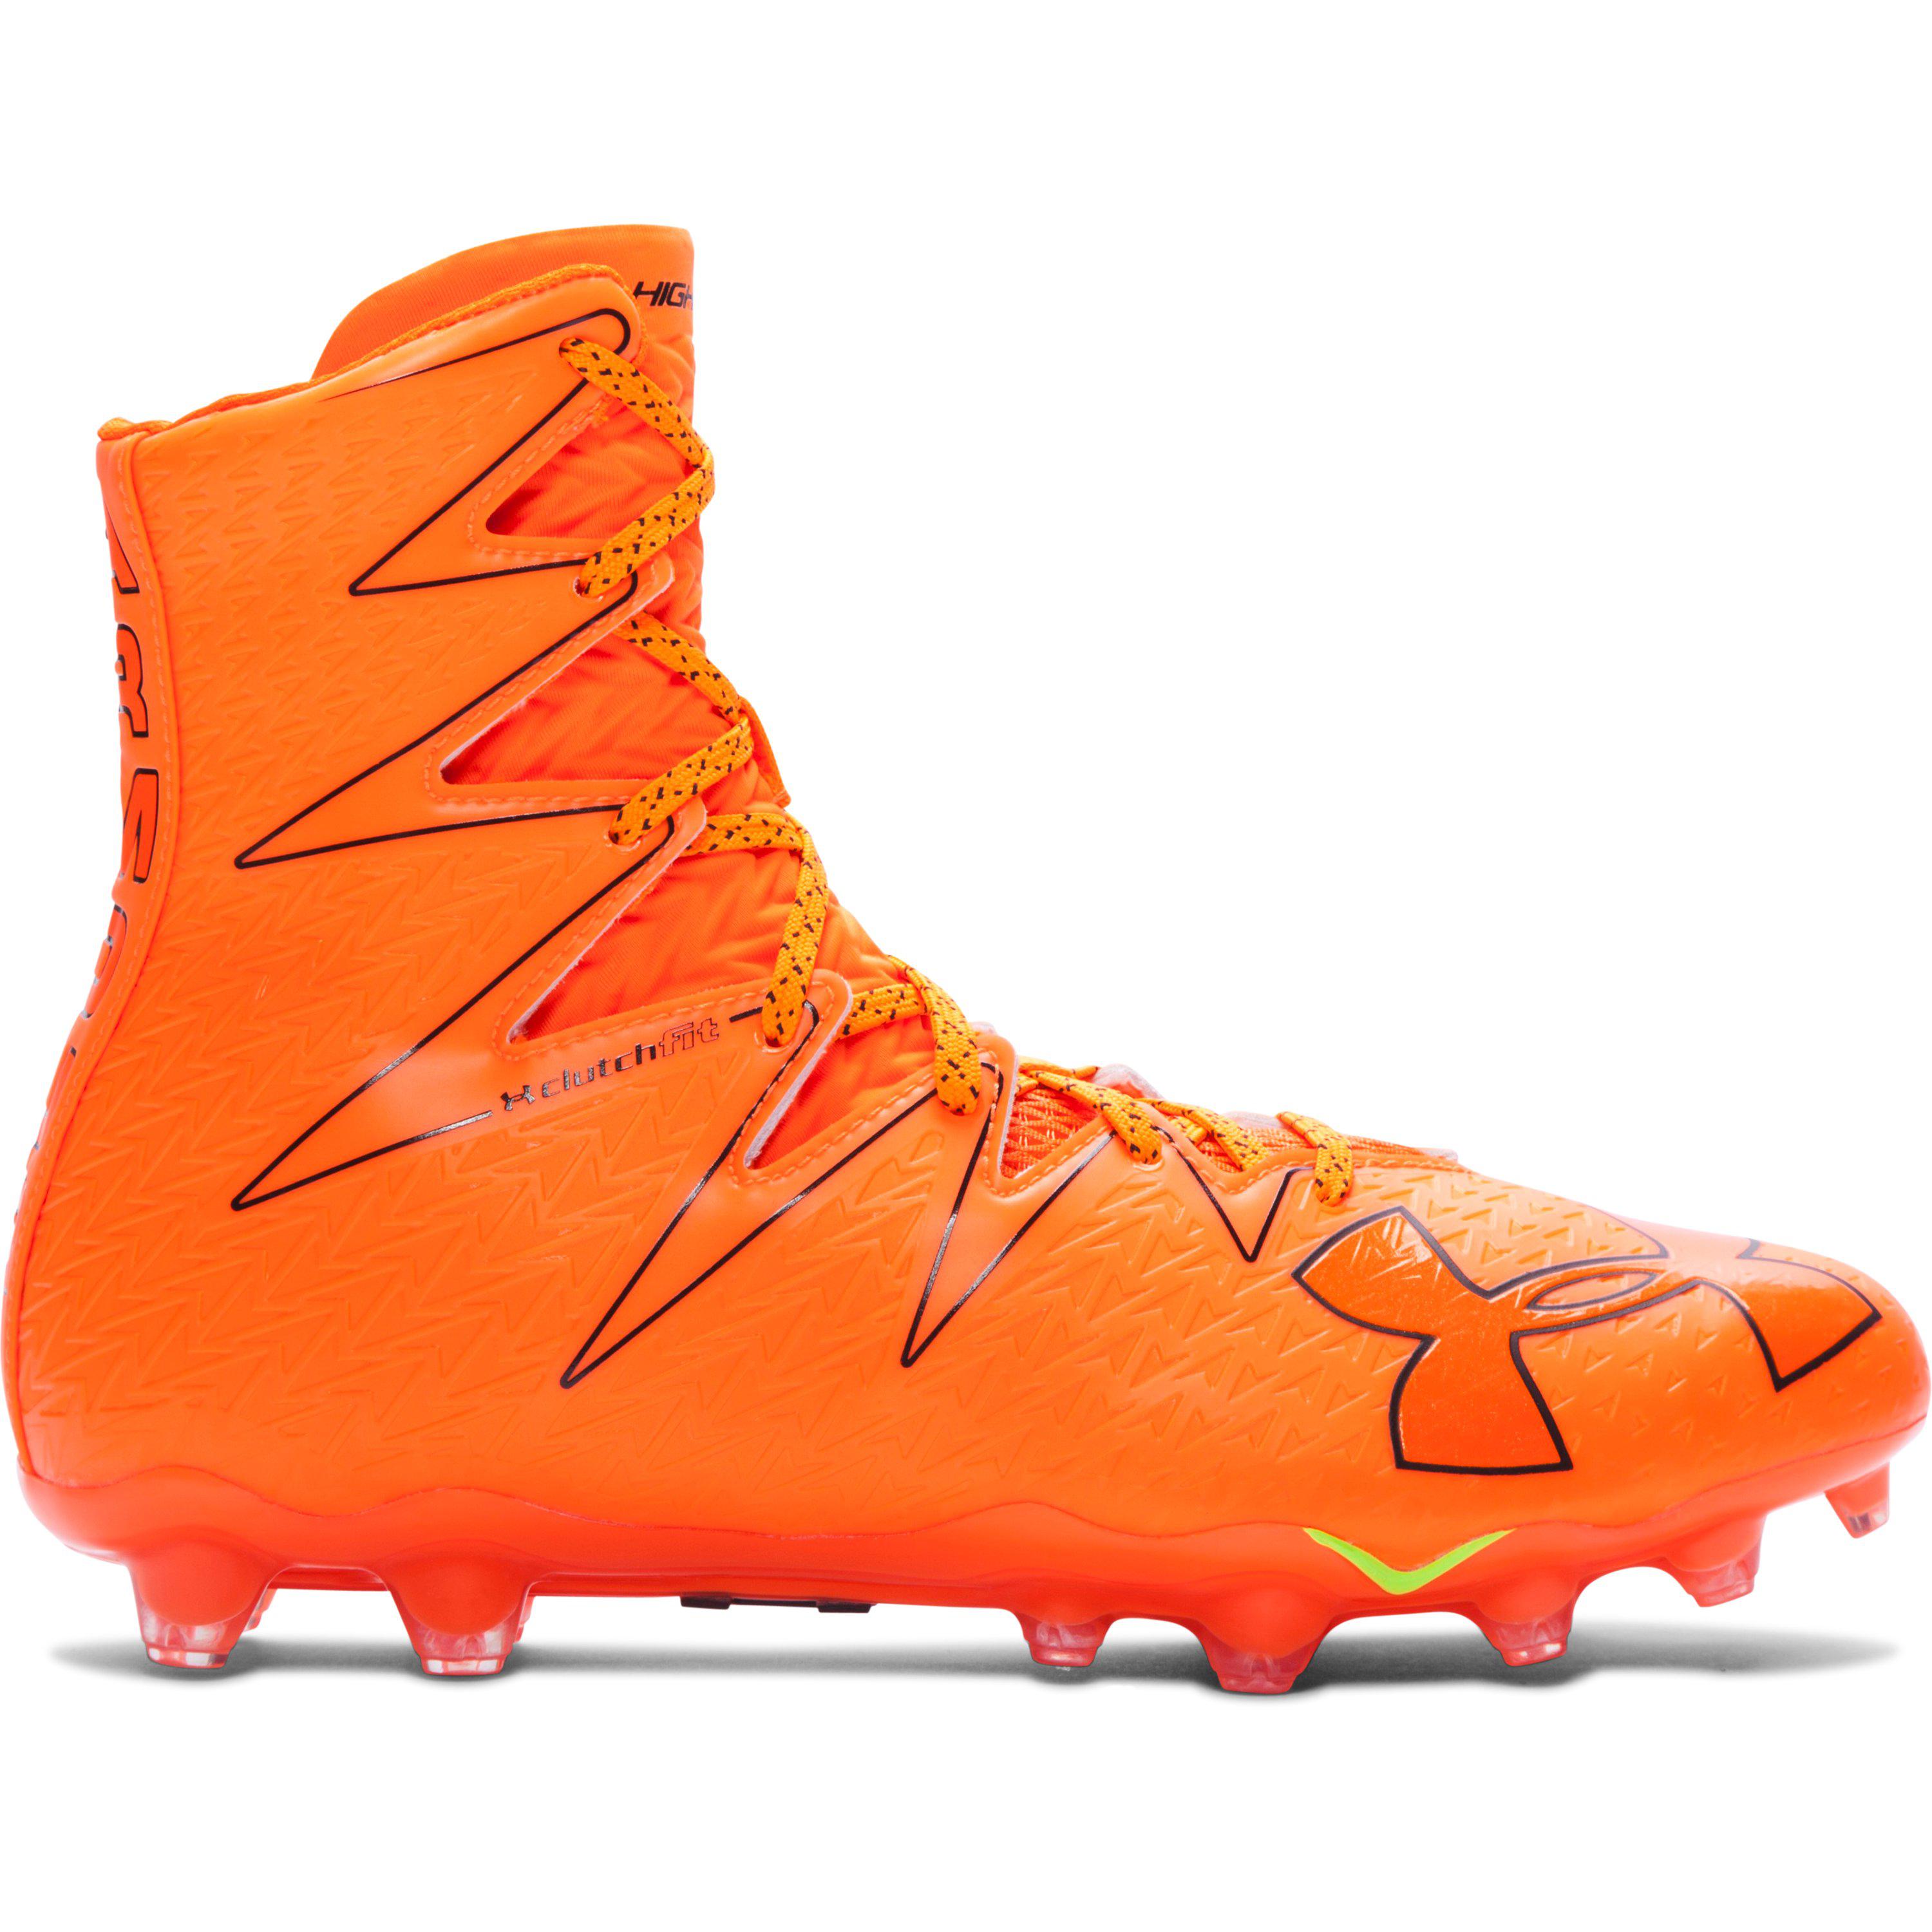 Under Armour Men's Ua Highlight Football Cleats – Limited Edition for